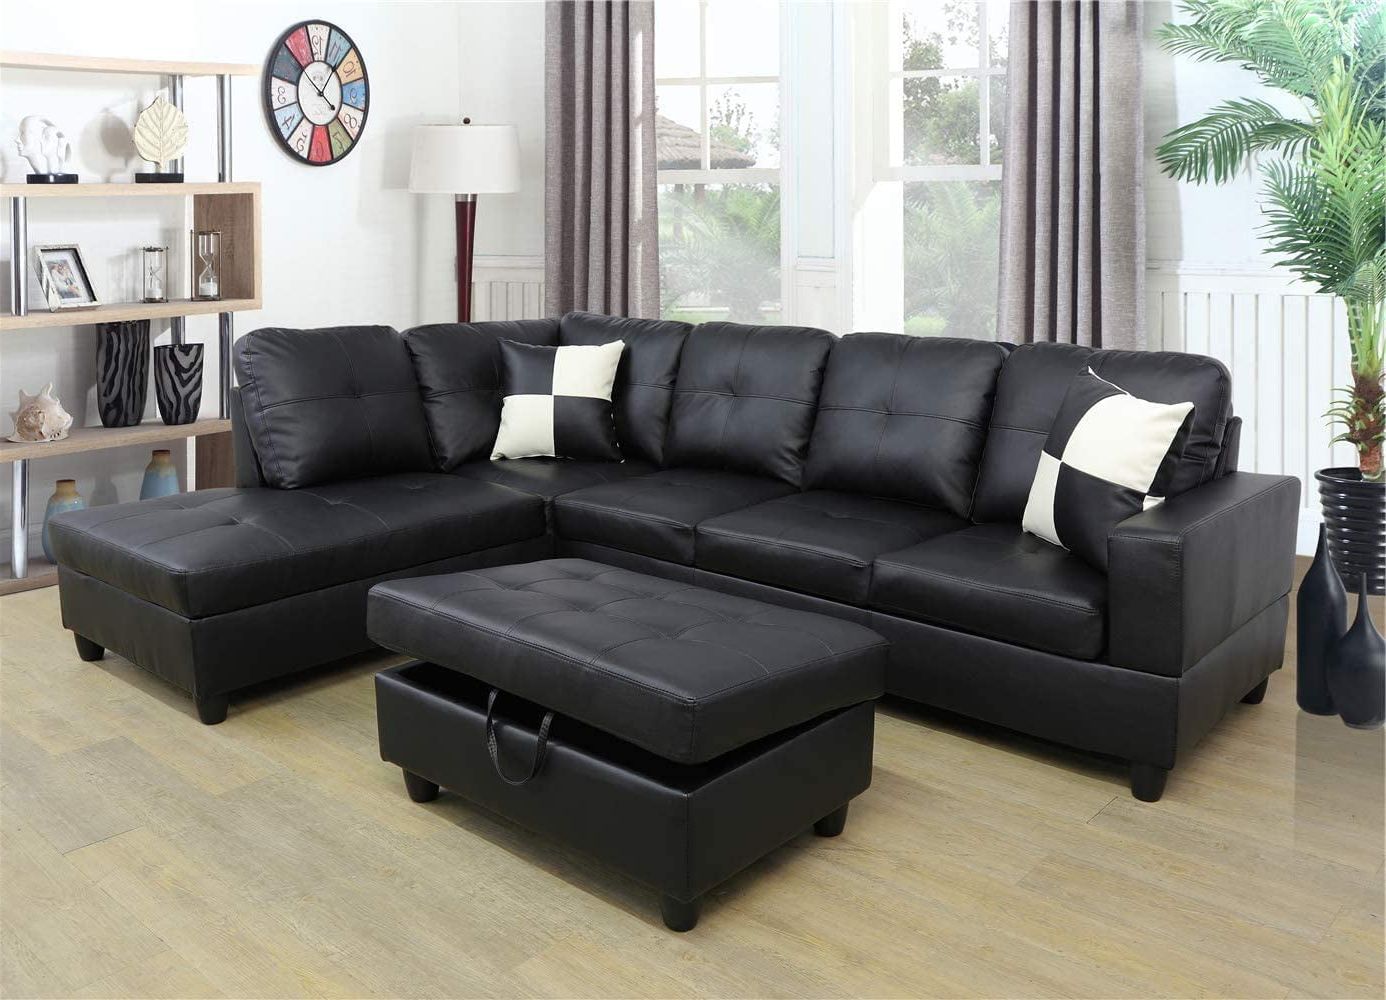 Ponliving Faux Leather 3 Piece Sectional Sofa Couch Set, L Shaped In 3 Piece Leather Sectional Sofa Sets (View 7 of 20)